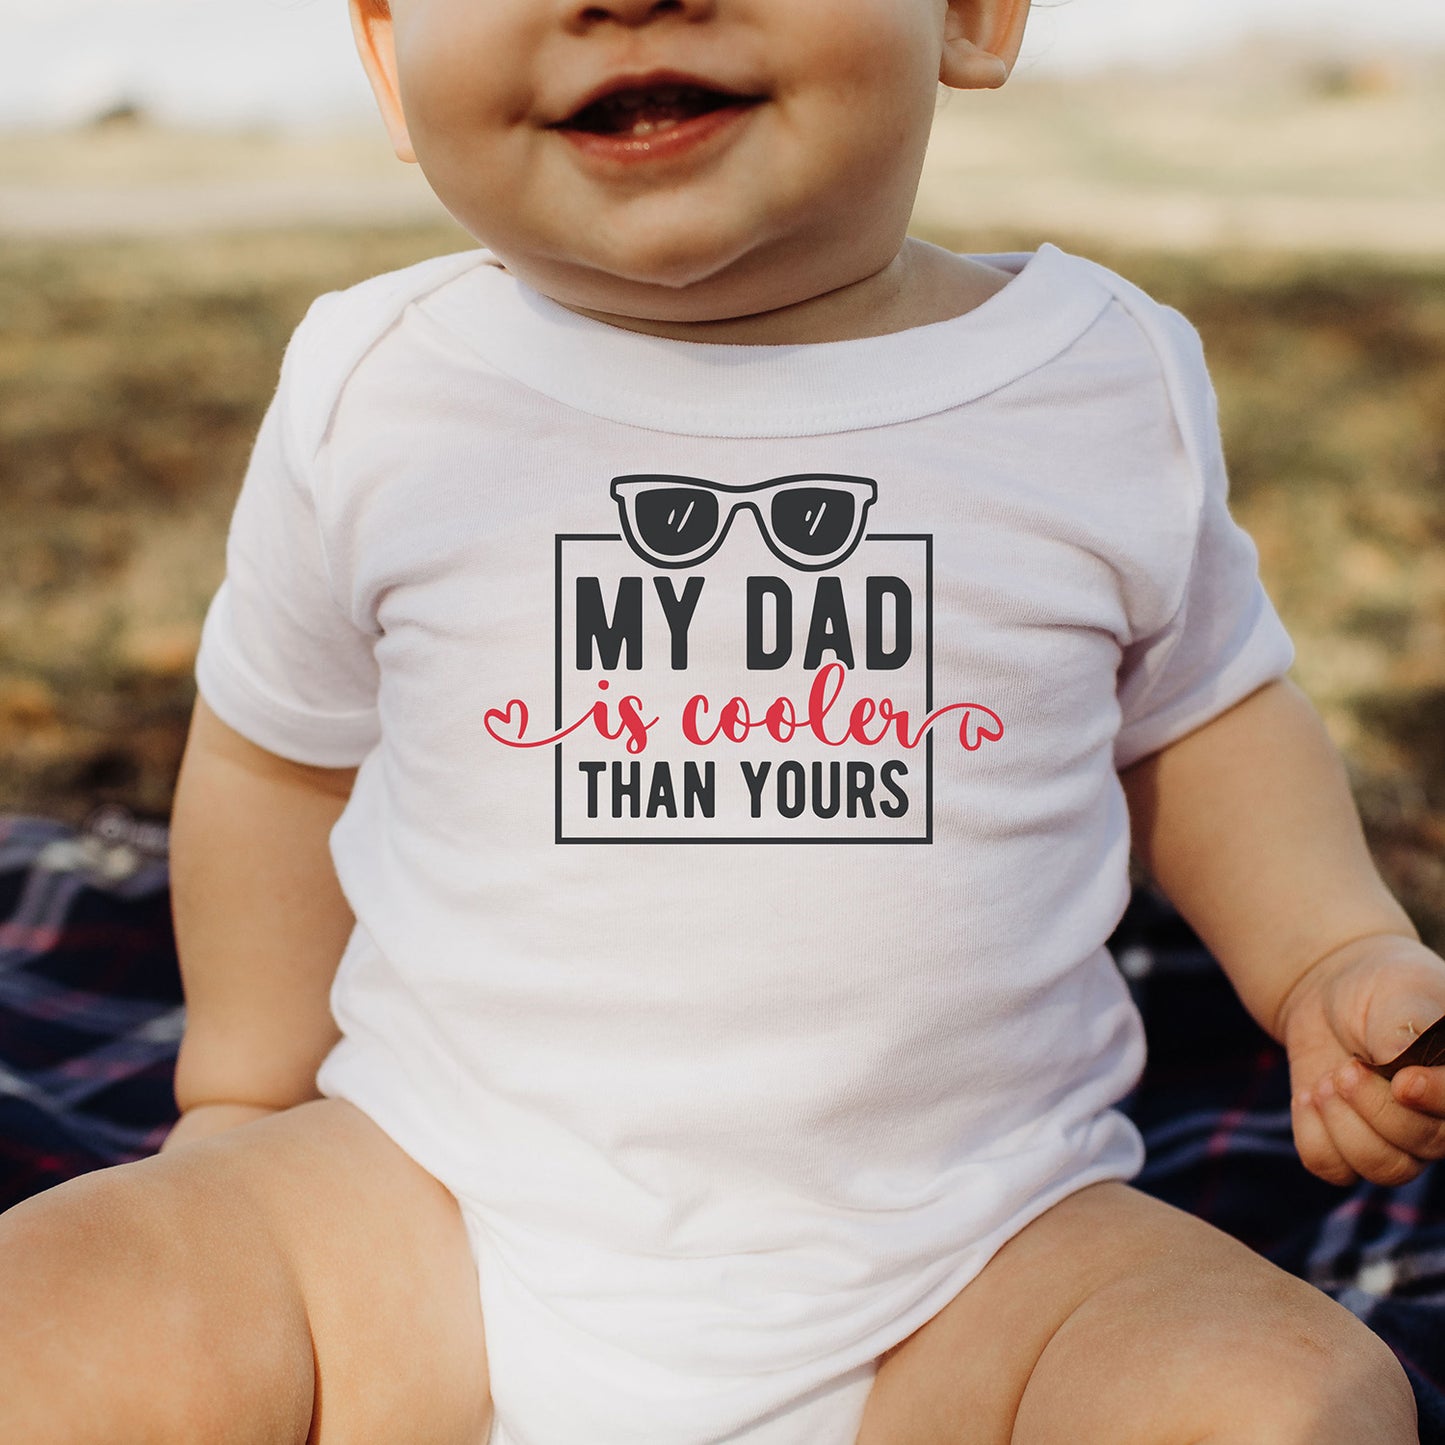 "My Dad Is Cooler Than Yours" Graphic